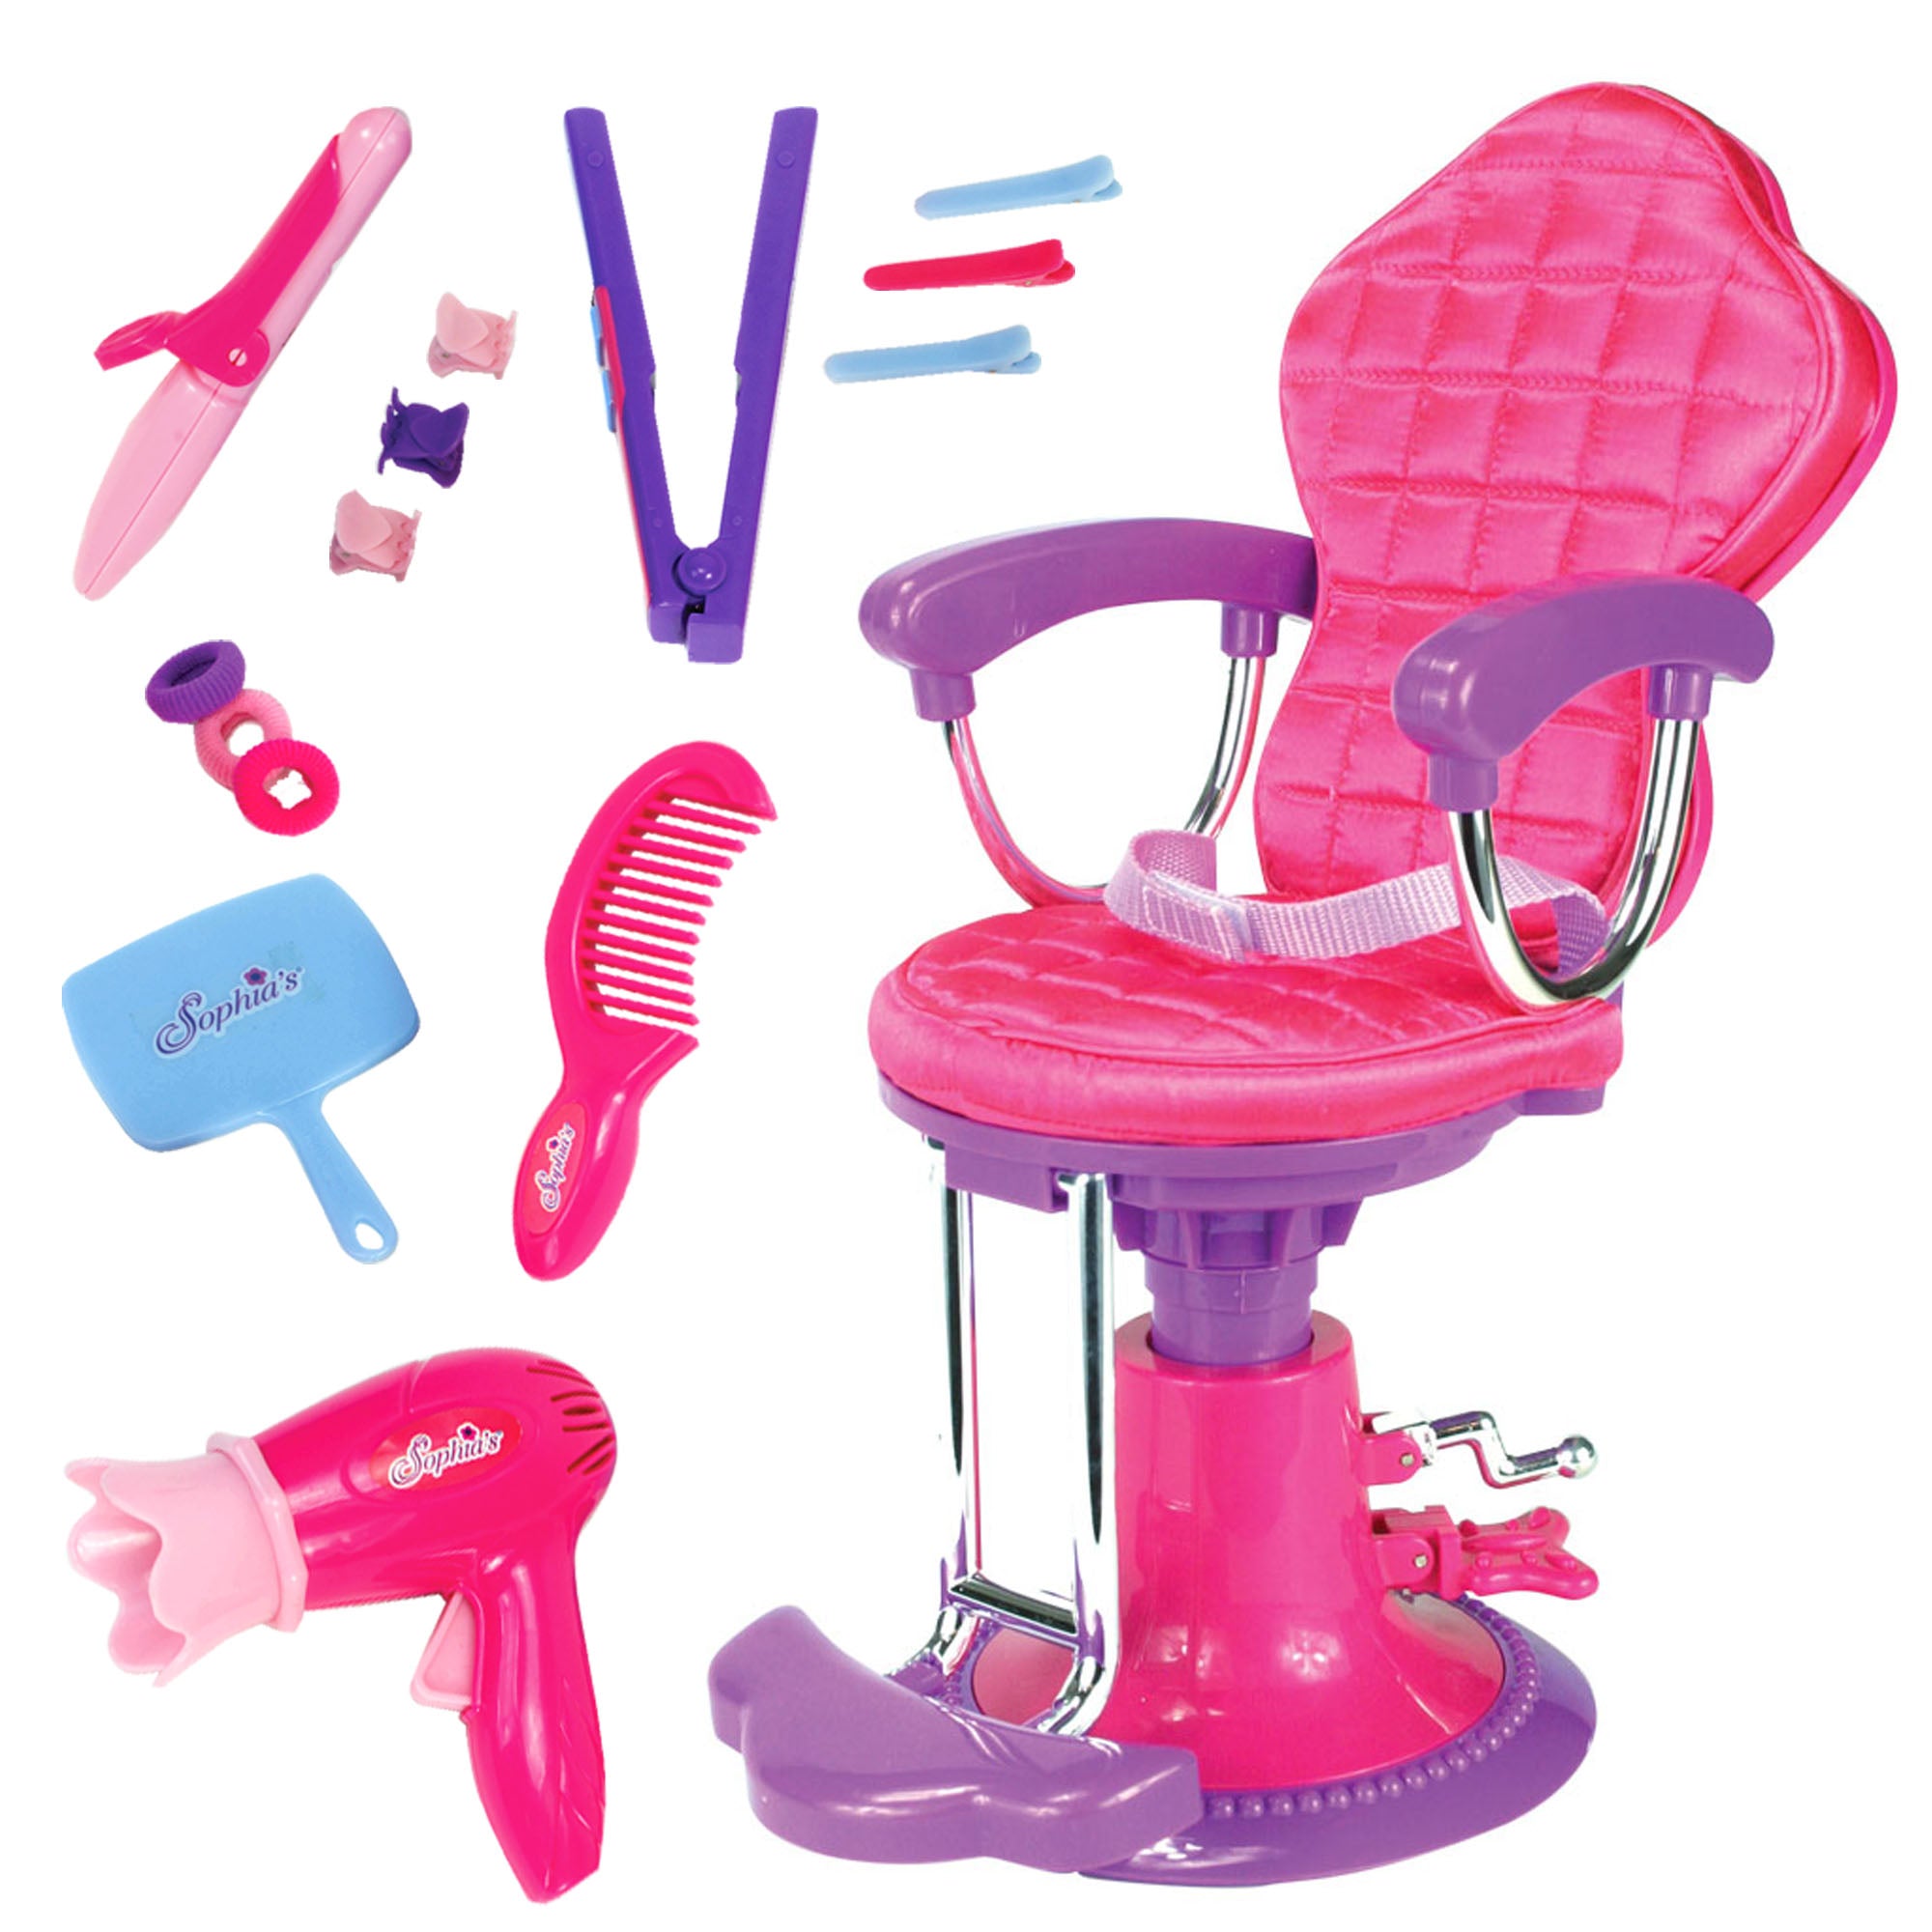 Sophia's Hair Styling Kit with Salon Chair Set for 18'' Dolls, Pink